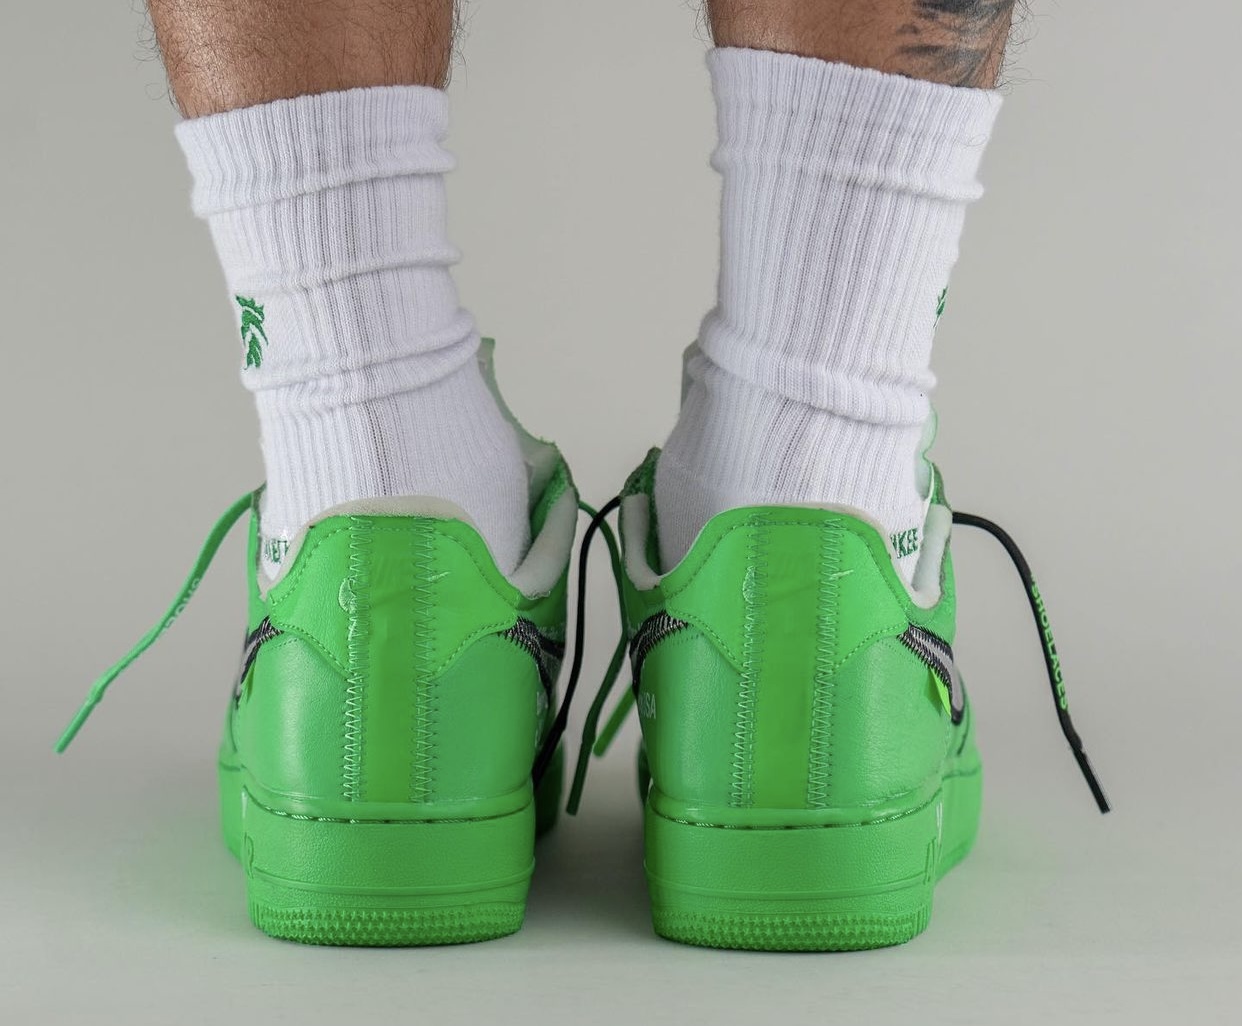 Off-White Nike Air Force 1 Low Light Green Spark On-Feet DX1419-300 Release Date